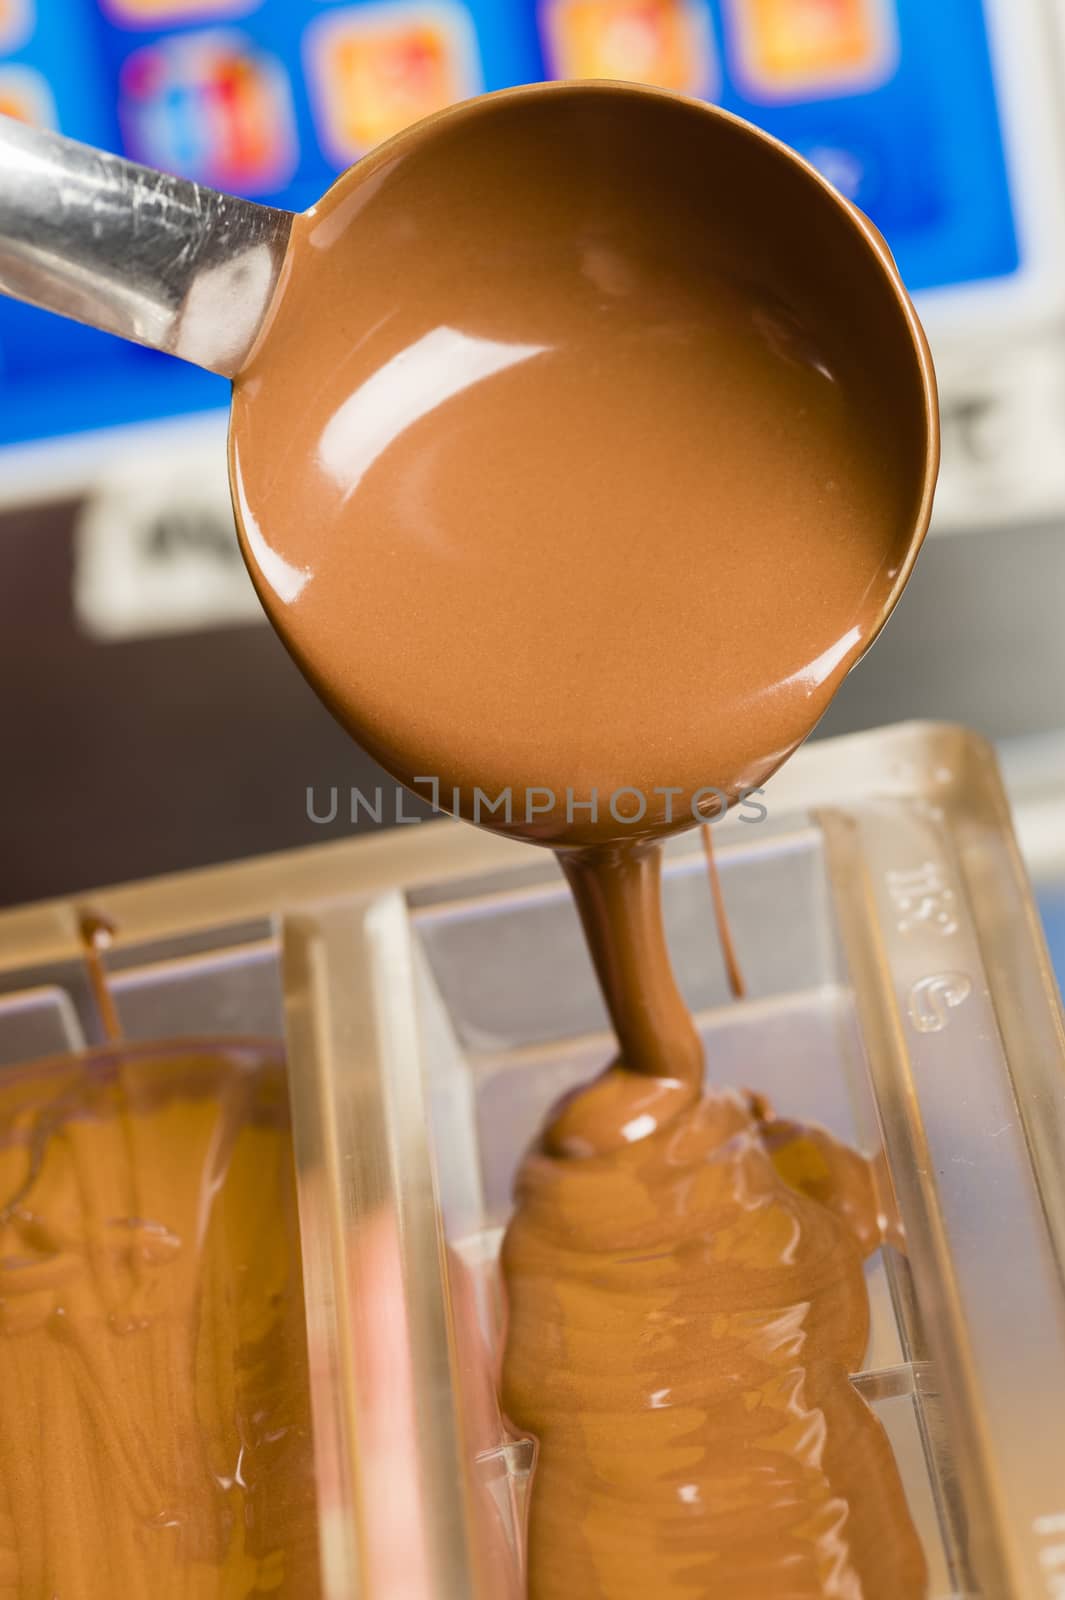 Mixed chocolate poured on bar mold